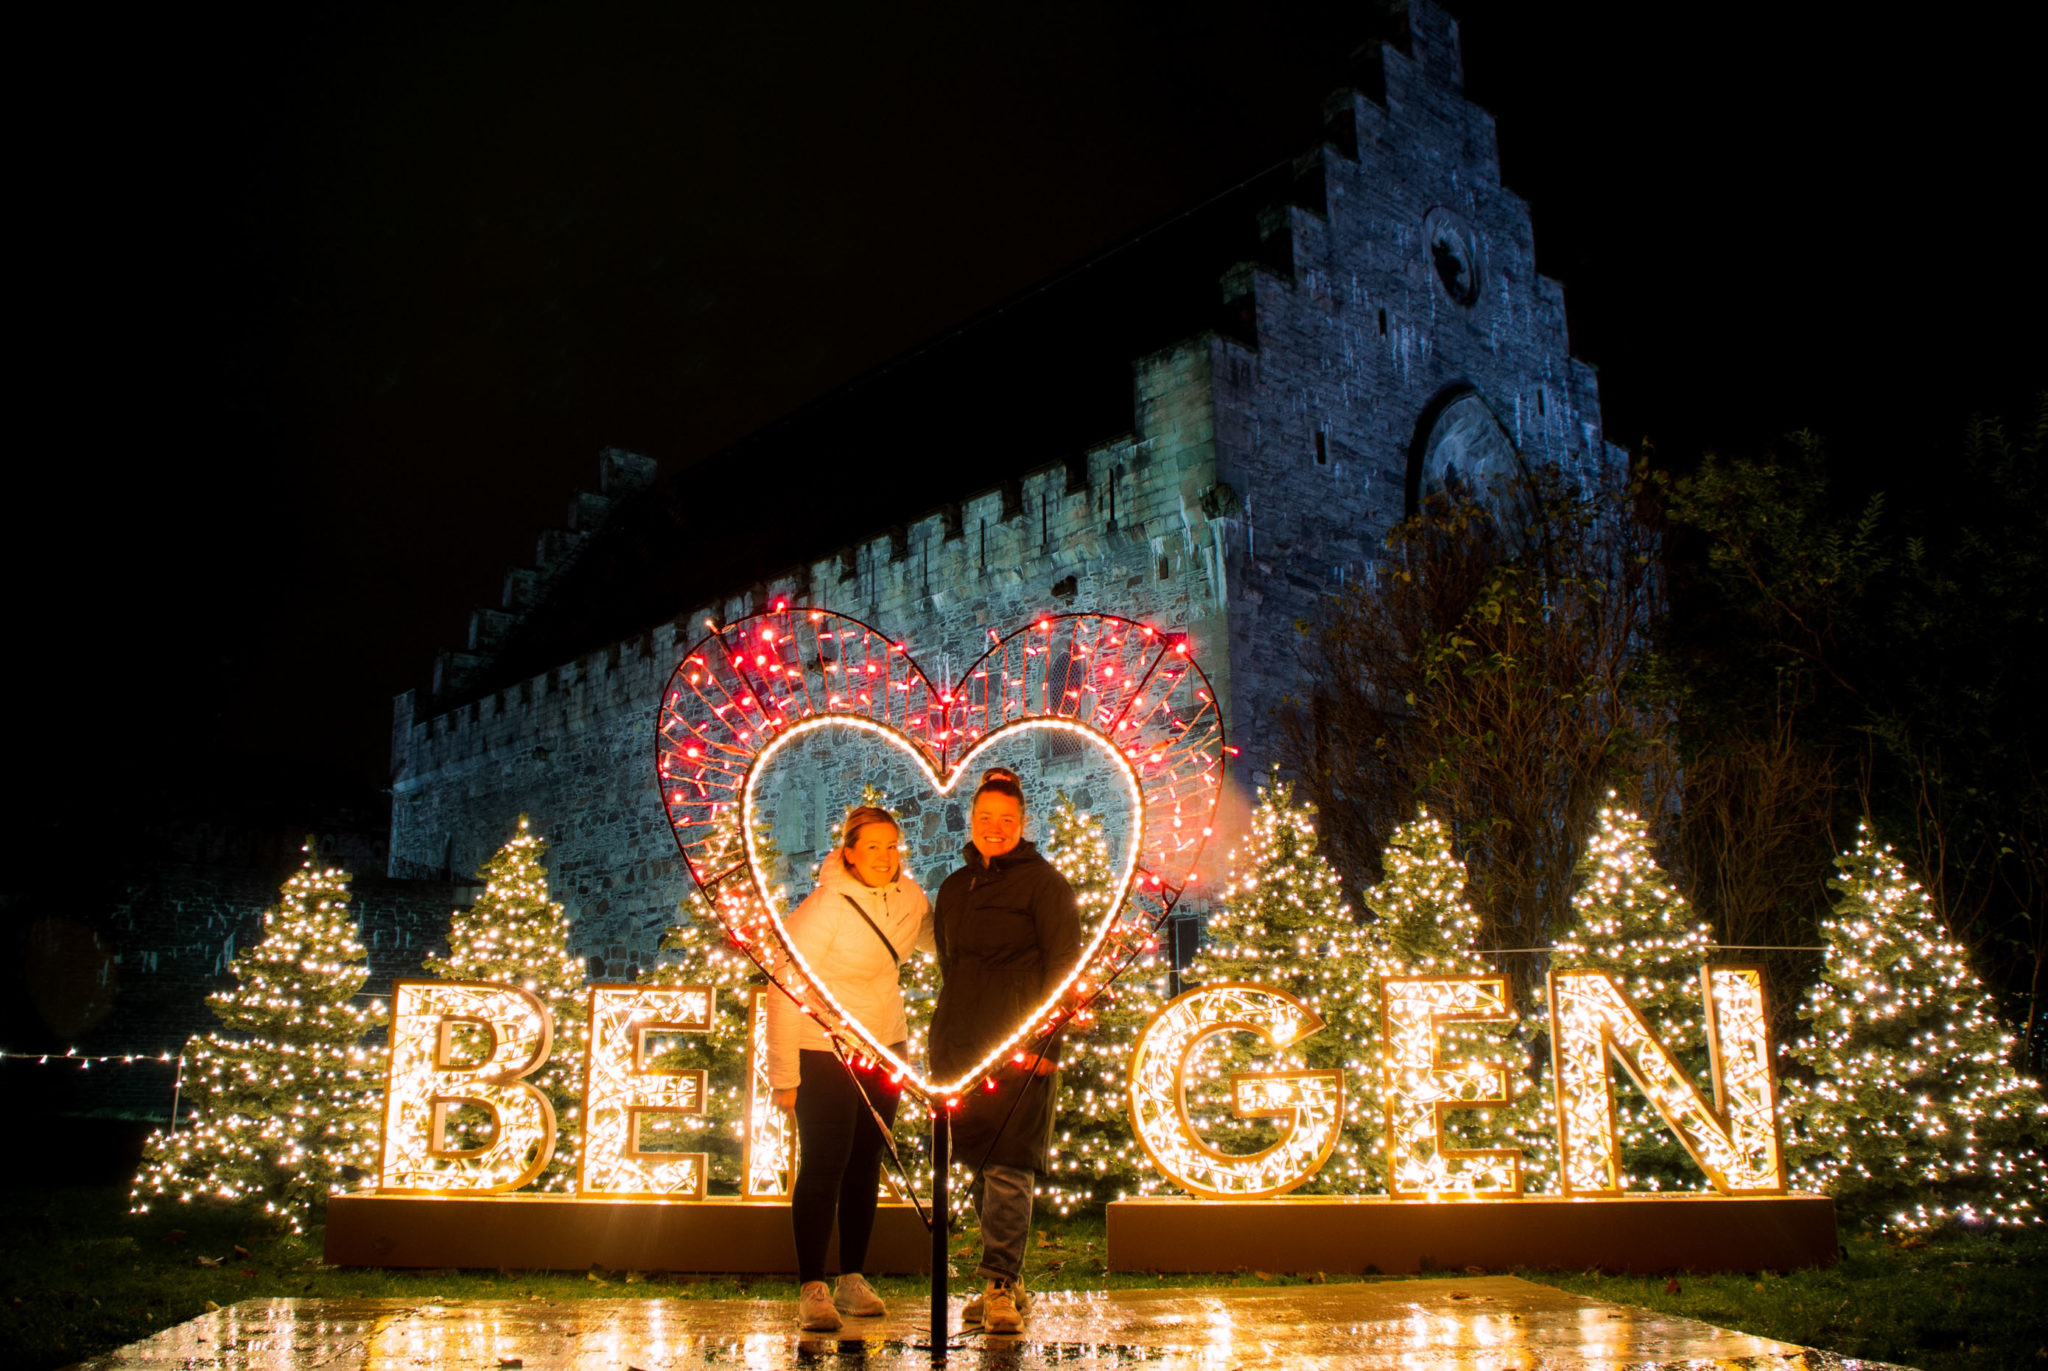 A declaration of love in front of the 13th c. Håkonshallen banquet hall © Lumagica